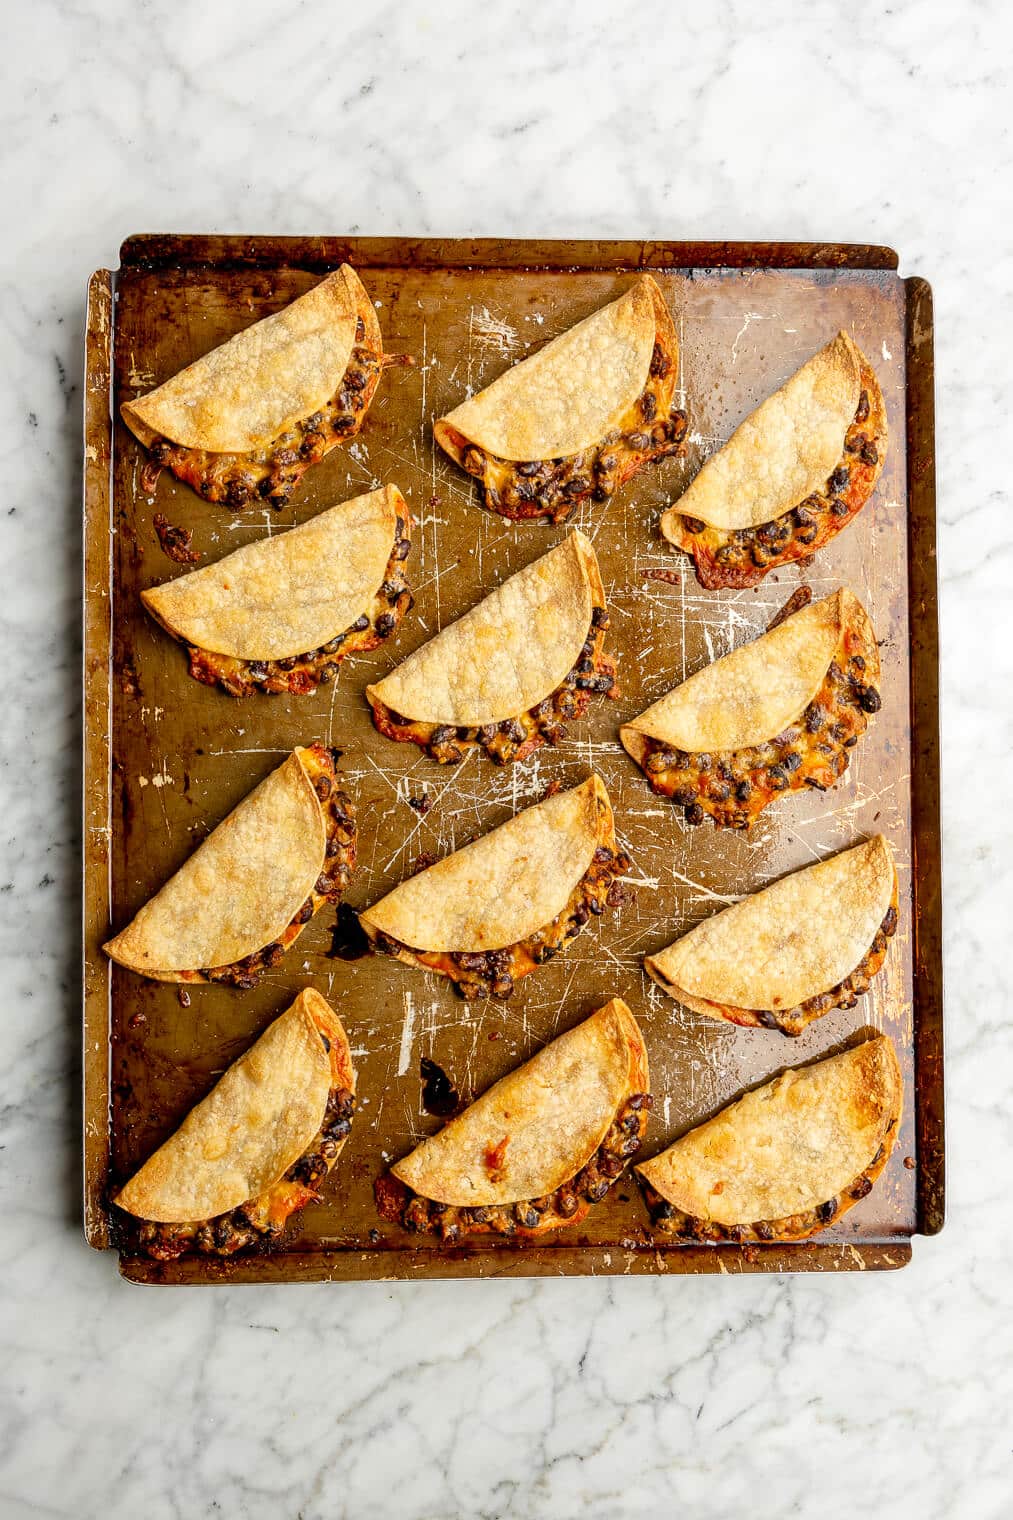 Top down of a metal sheet pan with 12 tortillas filled with beans and cheese folded in half, crisped, and baked.